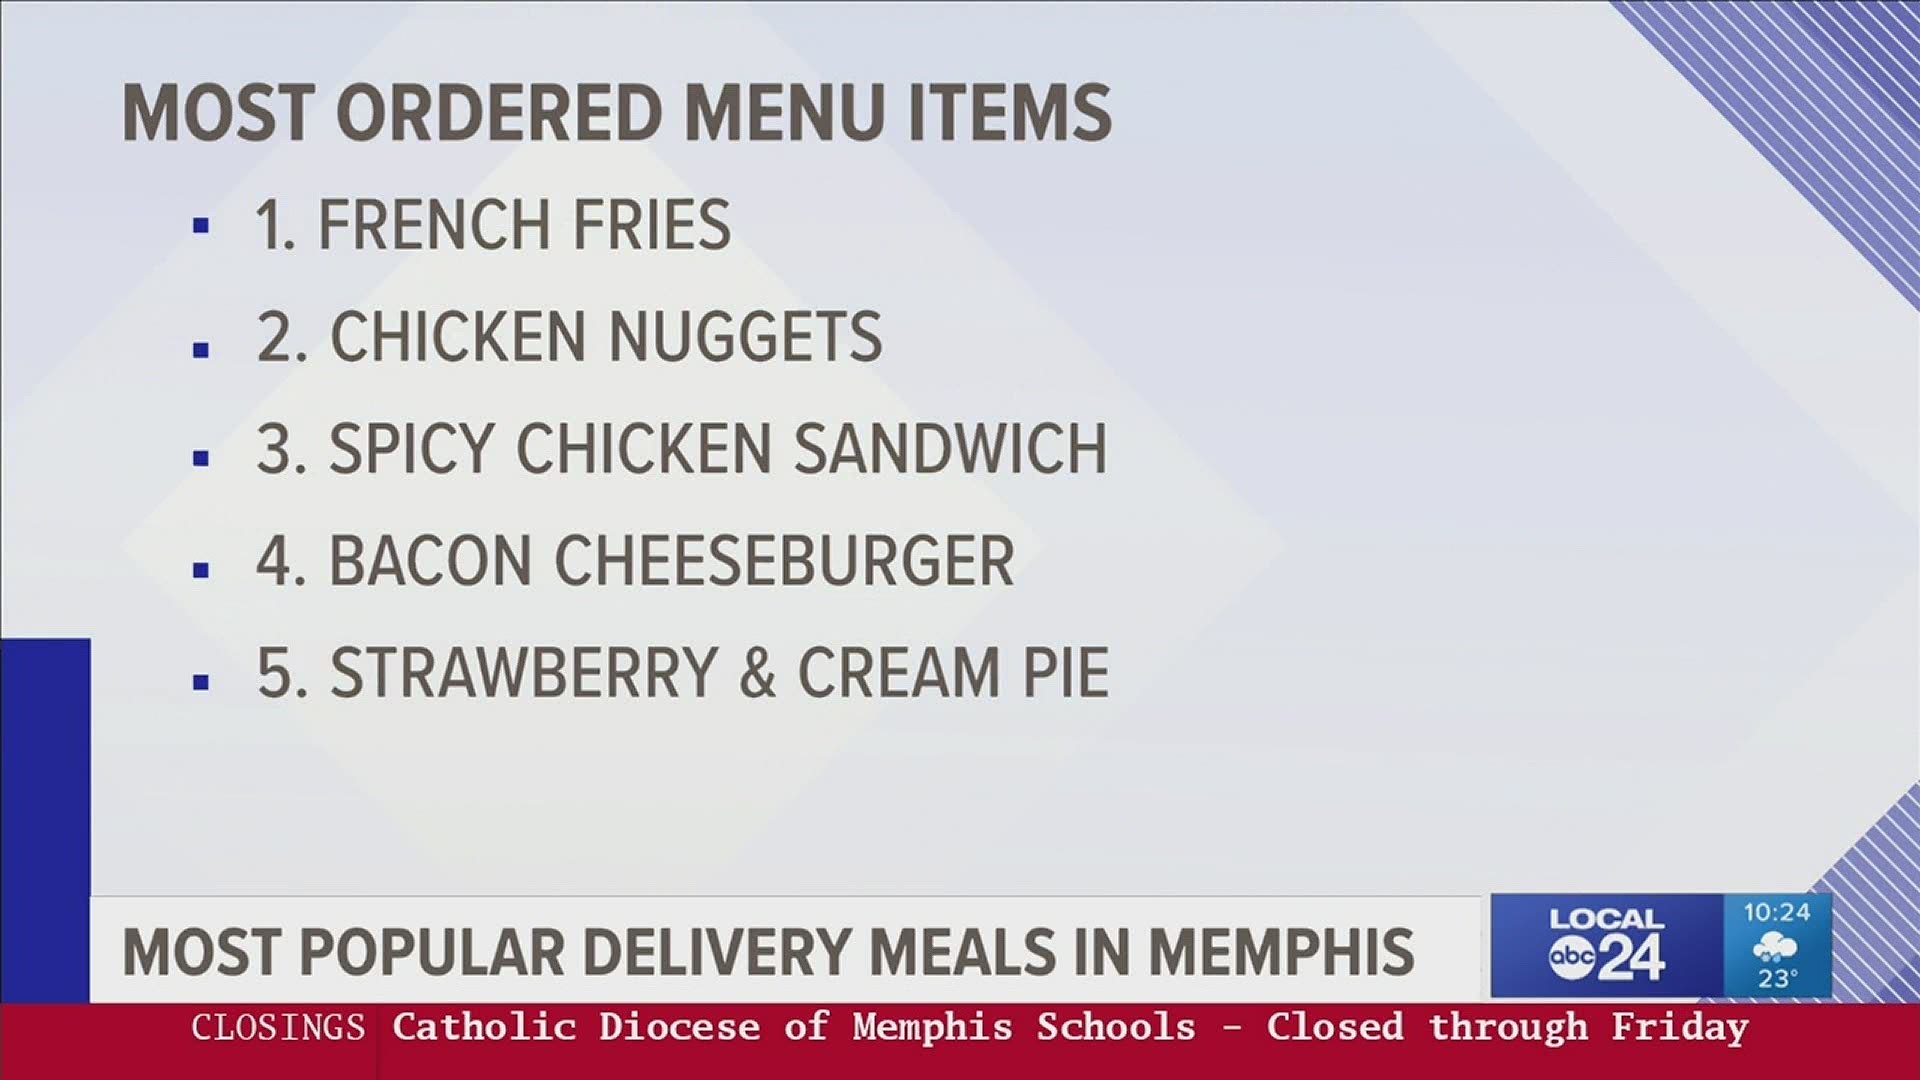 Local 24 News Anchor Richard Ransom discusses in his Ransom Note about how one food service looked at what Memphians order during this time.